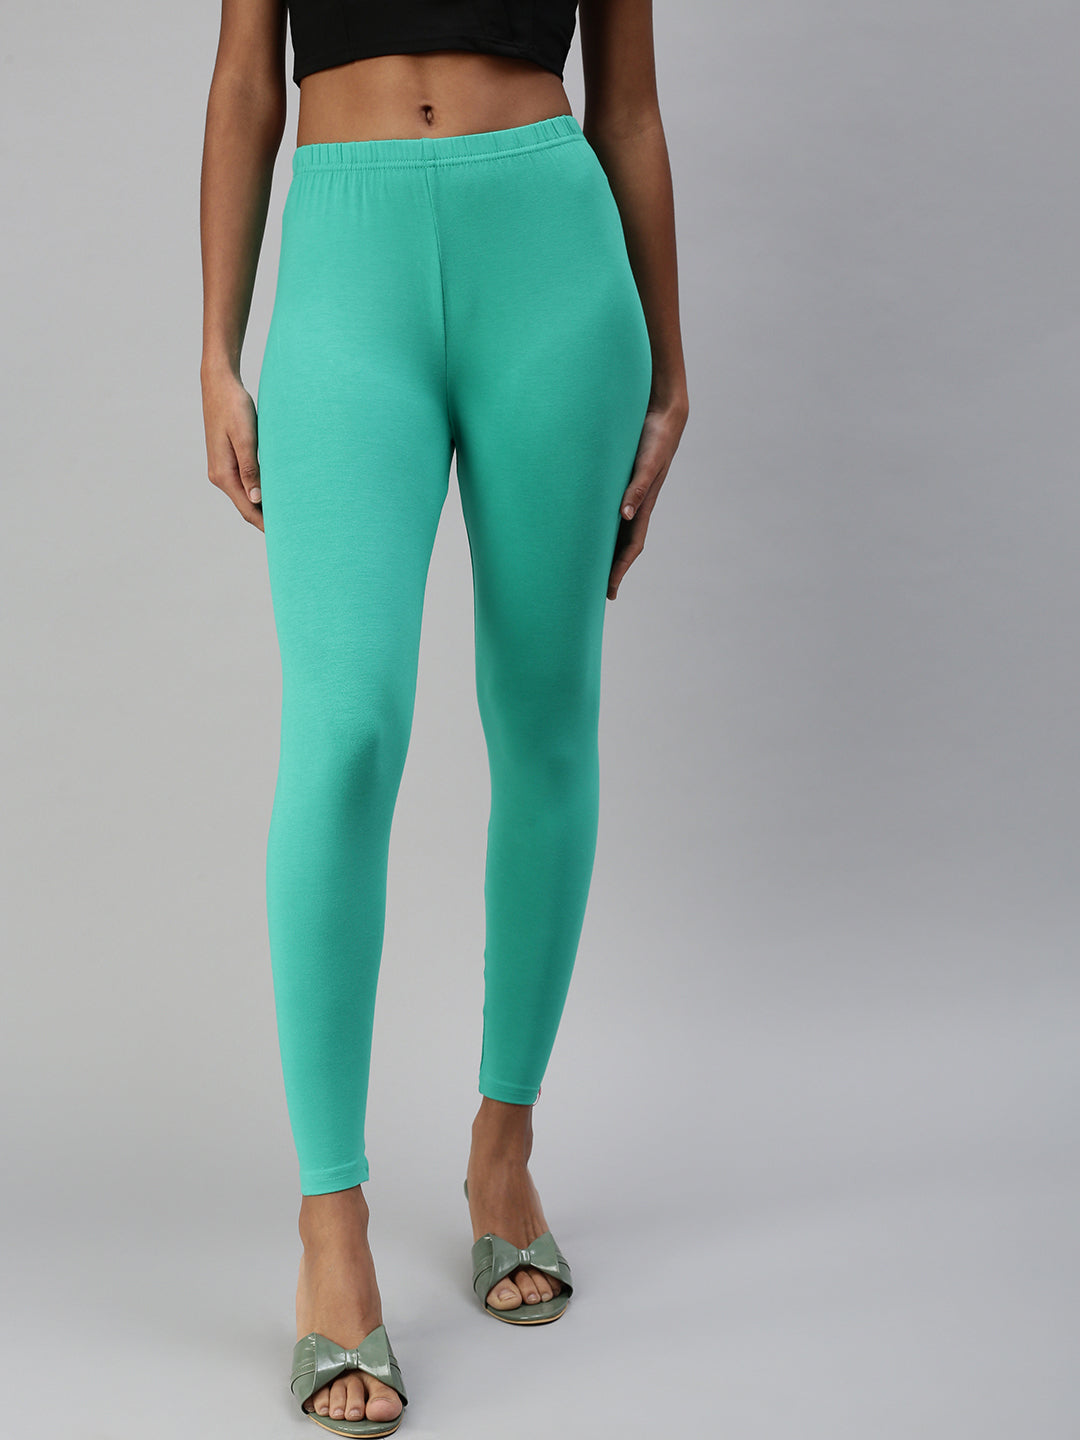 Shop Rani Pink Ankle Leggings by Prisma - Trendy and Comfortable